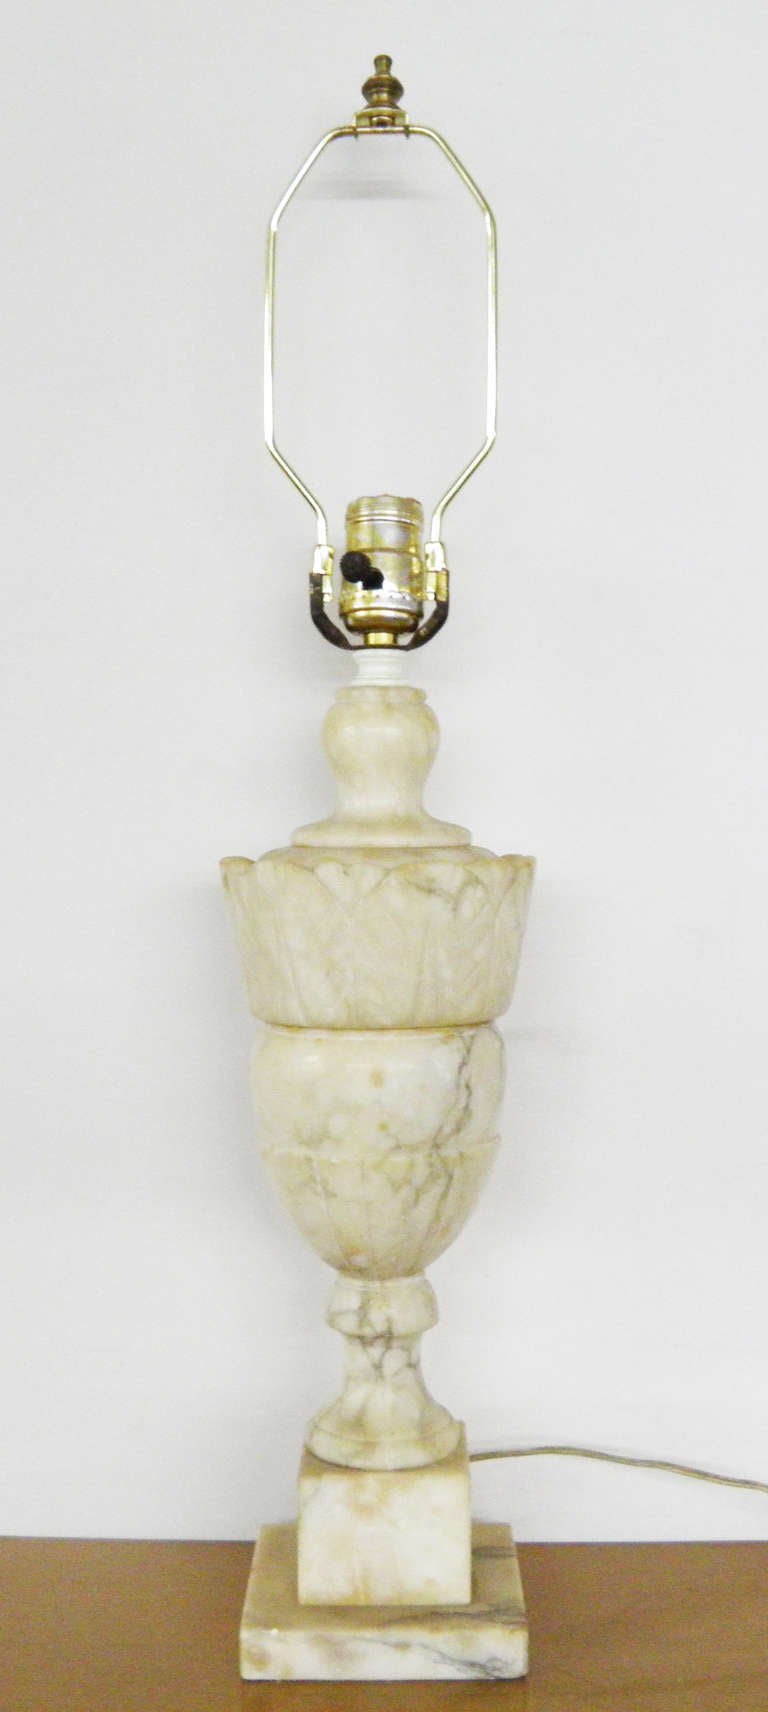 Classic Carrera marble Urn style vase with lamp application 
15 3/8 Lamp Base
24 7/8 w/ Lamp Application